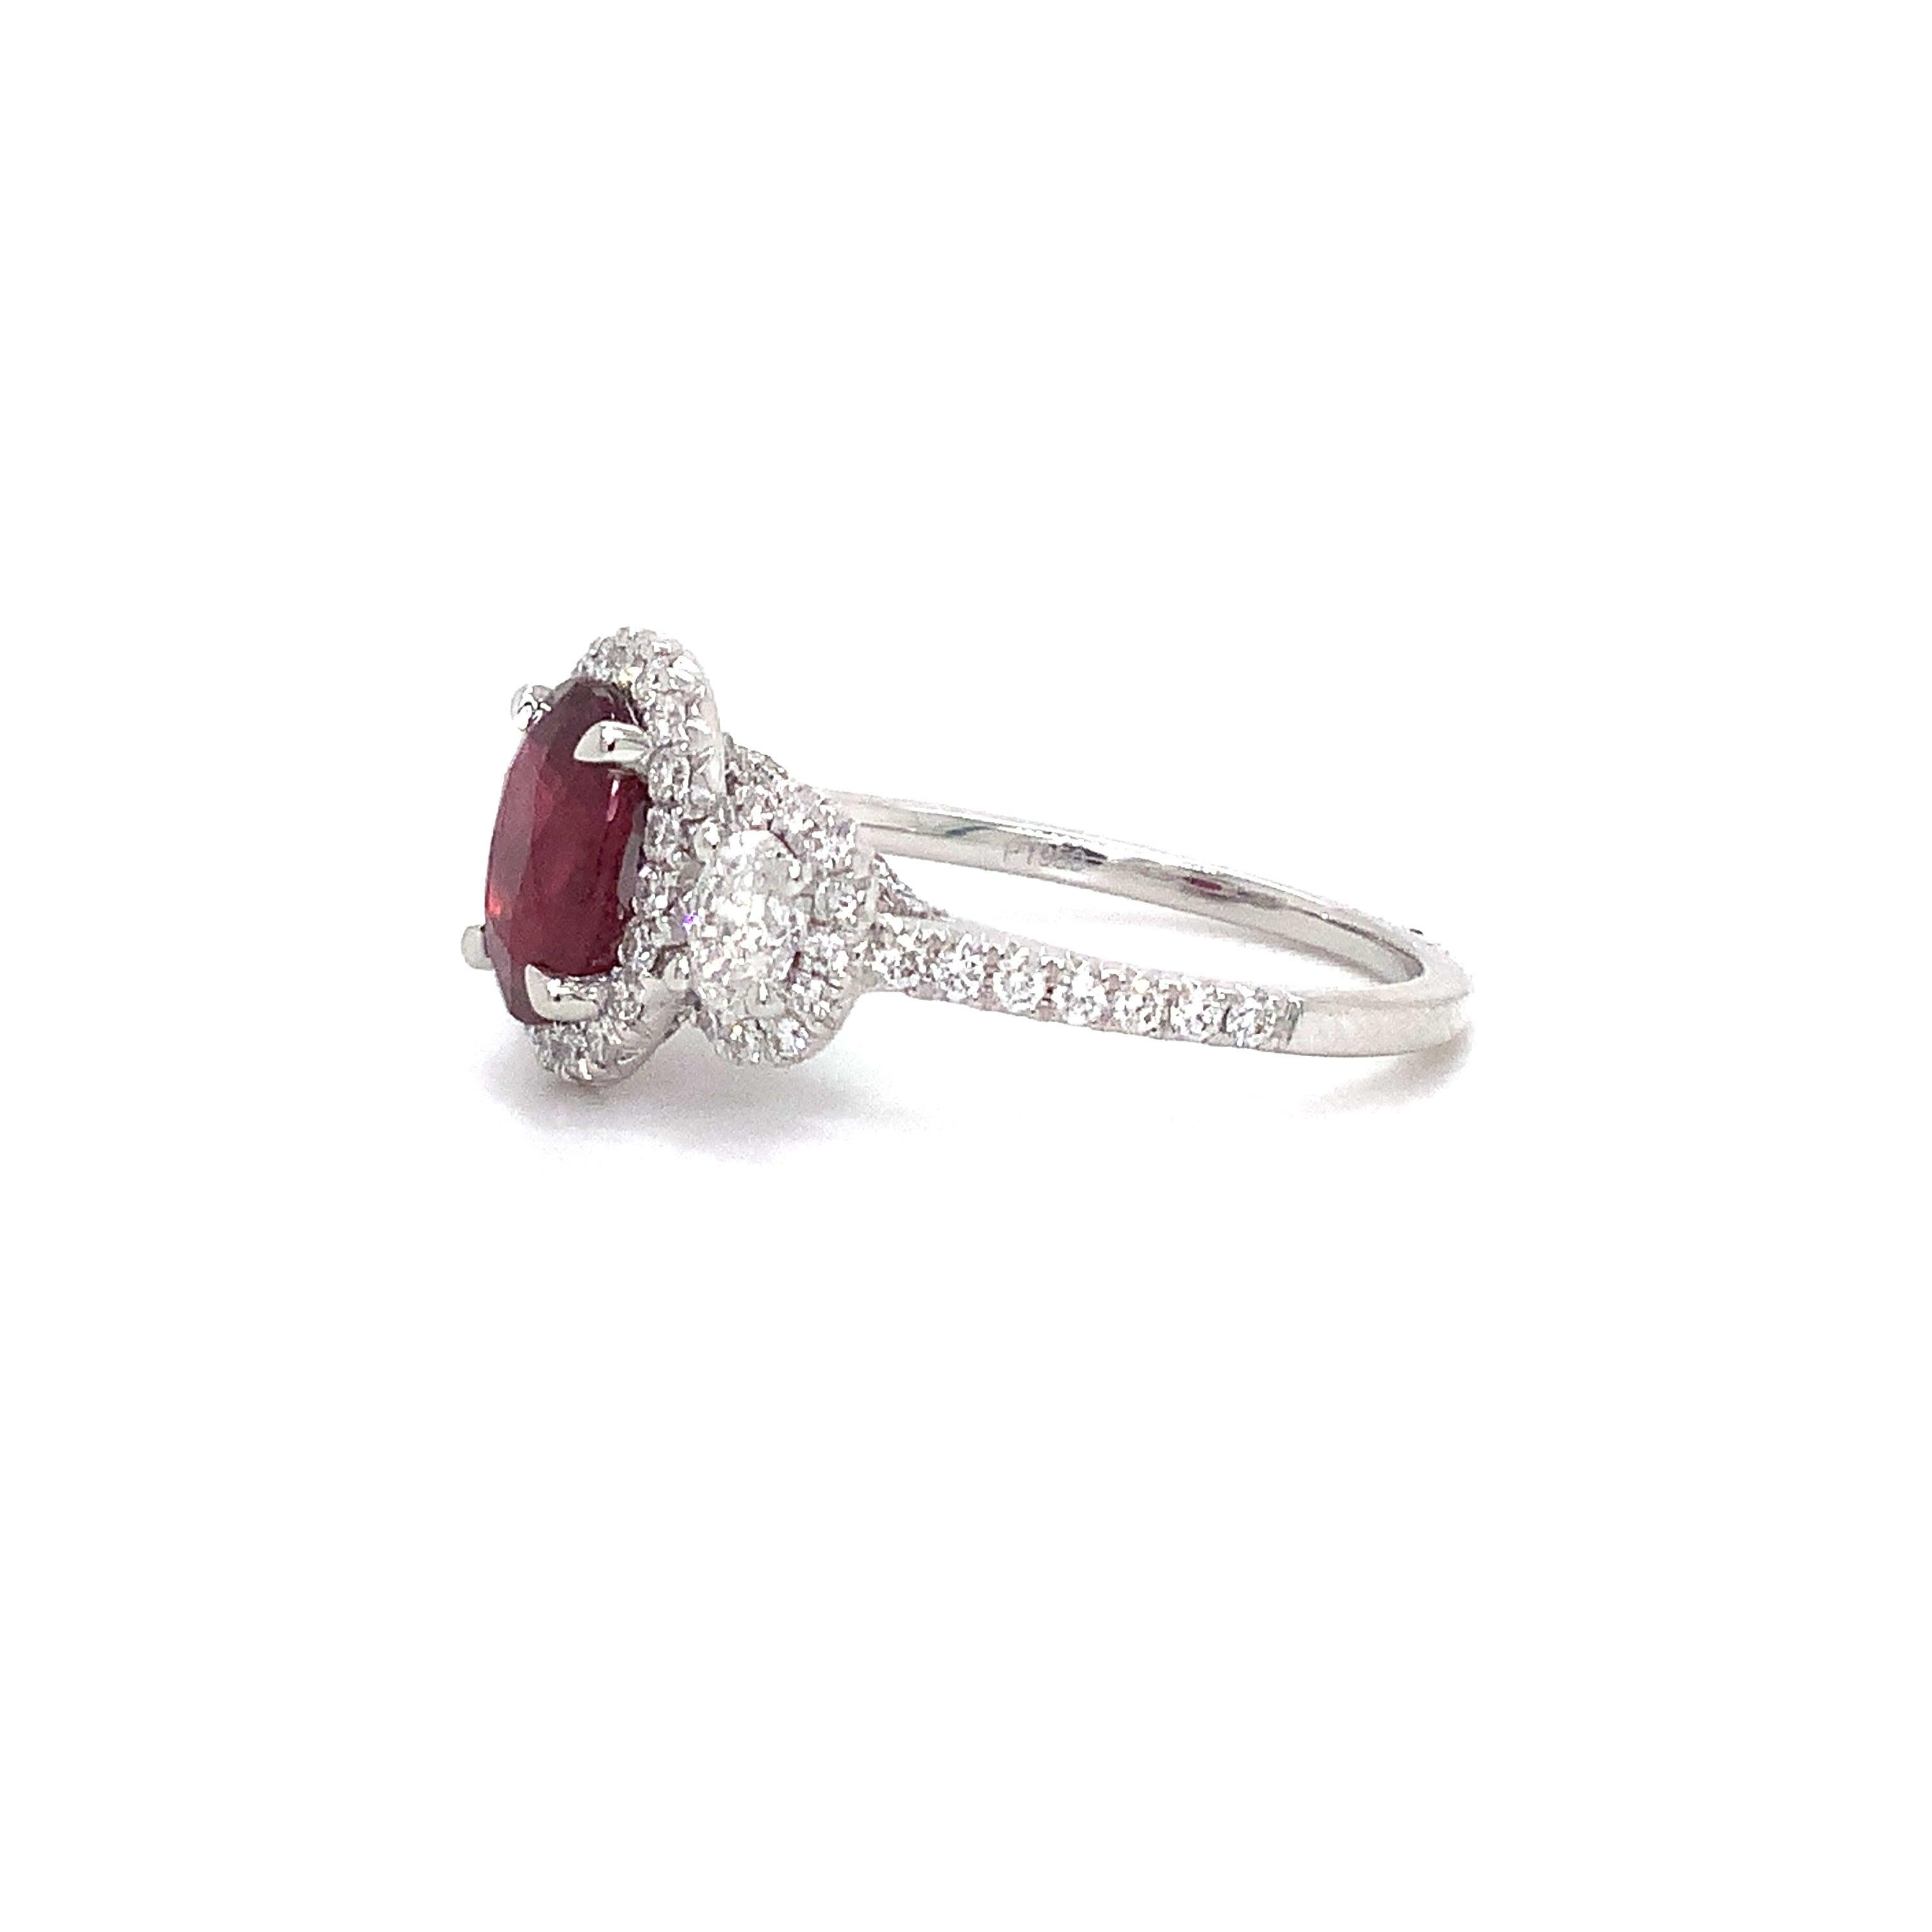 Roman + Jules Gia Certified 3 Stone Ruby and Diamond Ring Set in 950 Platinum In New Condition For Sale In Los Gatos, CA